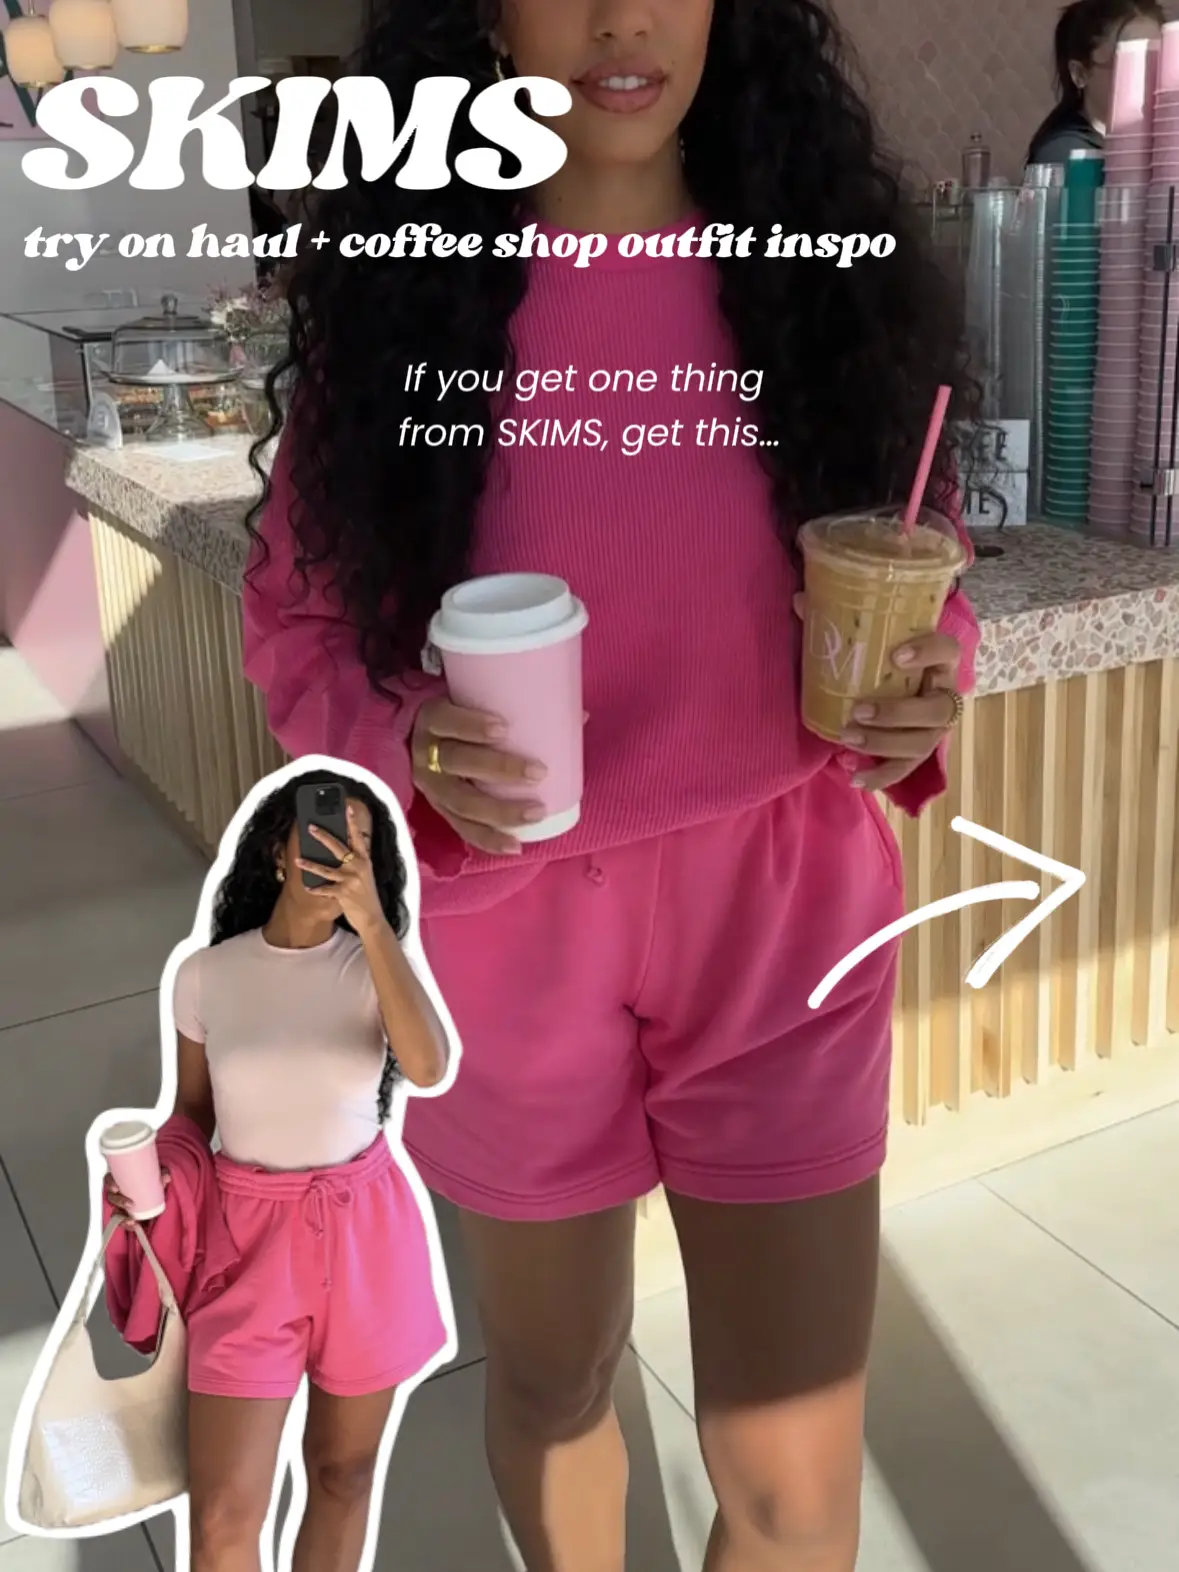 SKIMS TRY ON HAUL & COFFEE SHOP OUTFIT INSPO